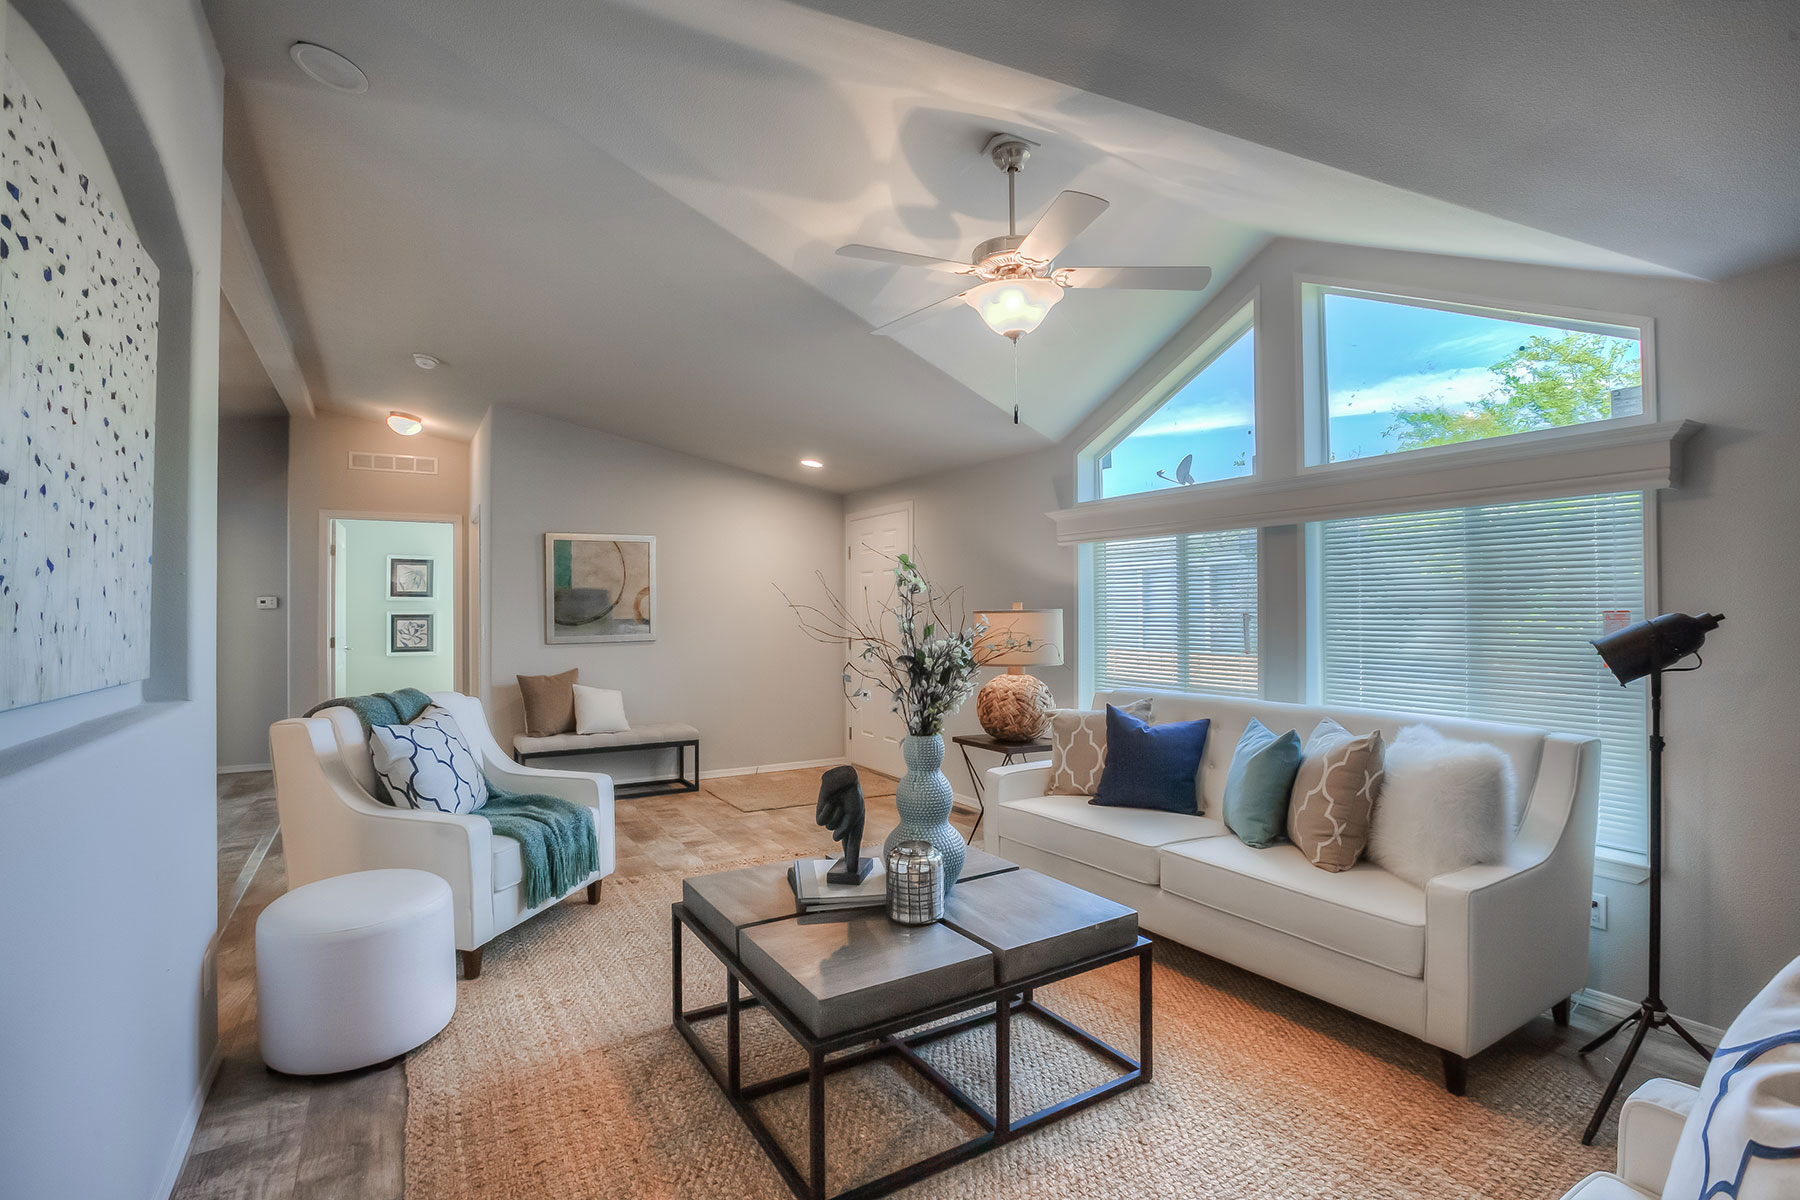 Skyline Homes Westridge 1222CT Manufactured Home Living room featuring ceiling fan, vaulted ceiling, large windows